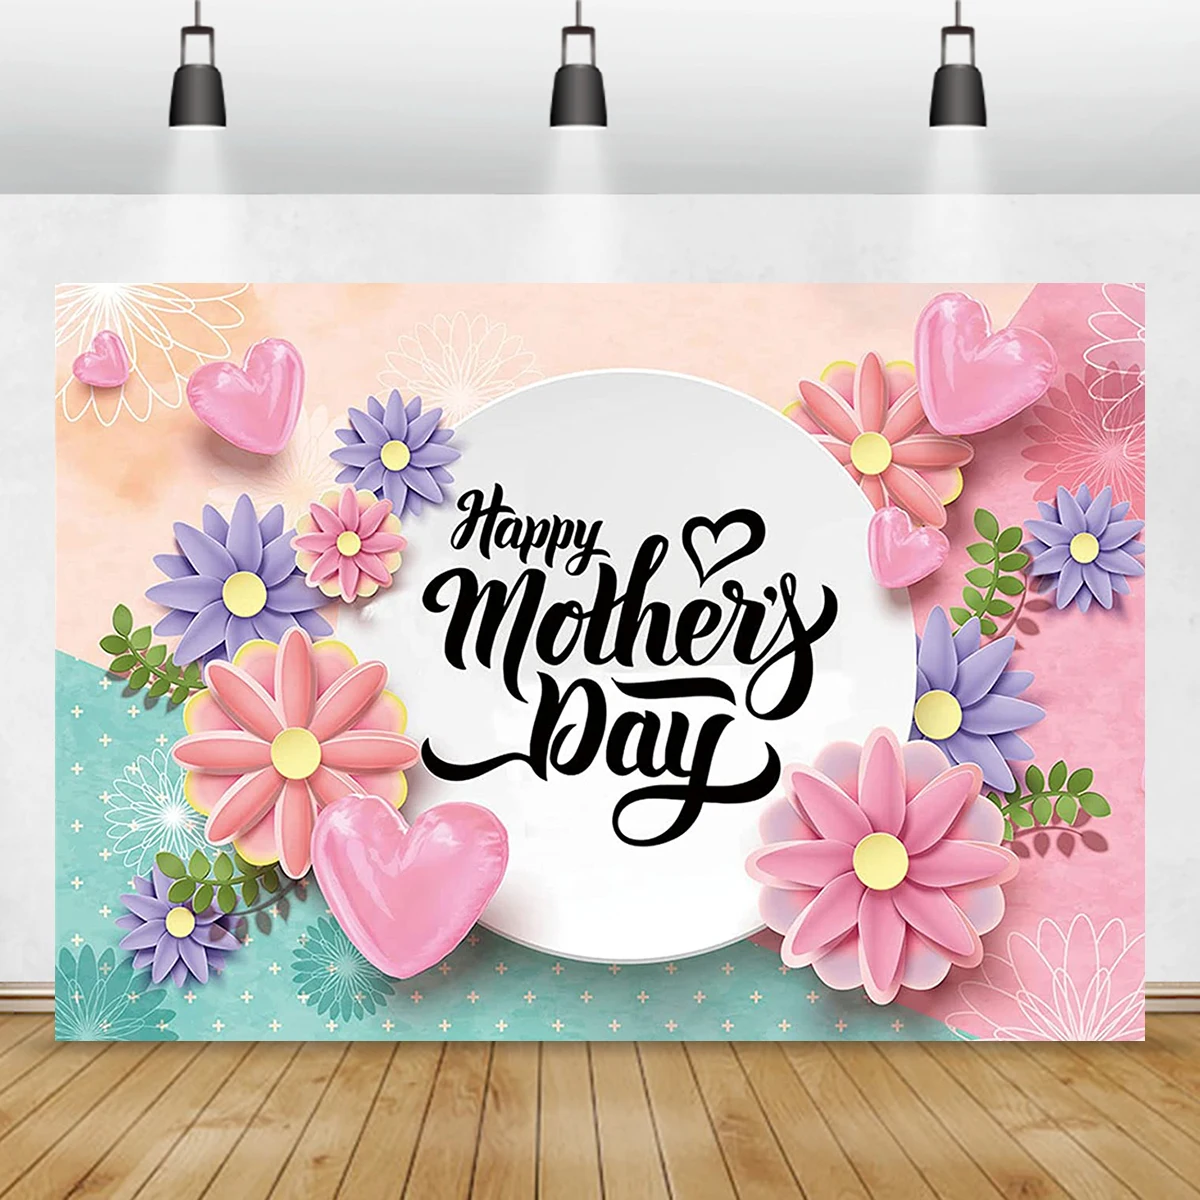 Happy Mother's Day Festival Love Rose Backdrop Party Decorations Photography Background Supplies Booth Prop  Family Photo Shoot enlarge